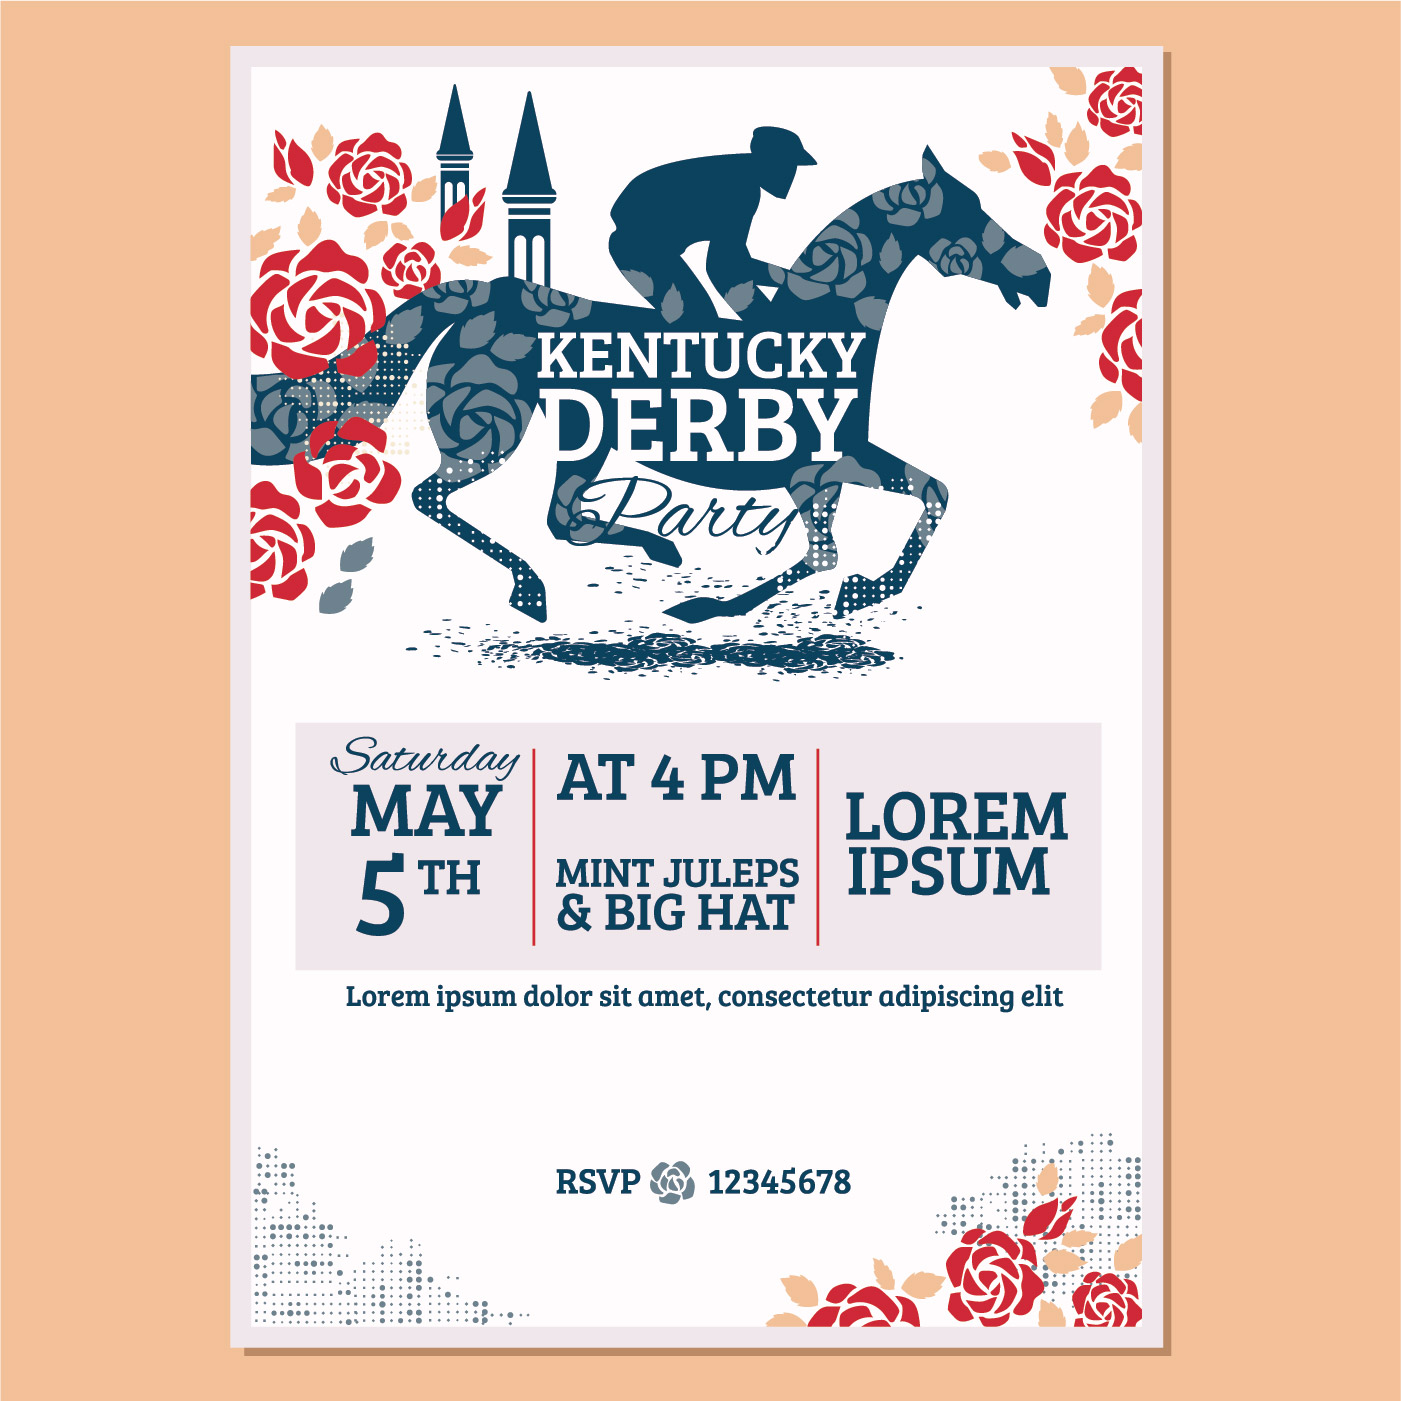 Kentucky derby Party Invitation Classic Style with Rose and Churchill Downs background 194946